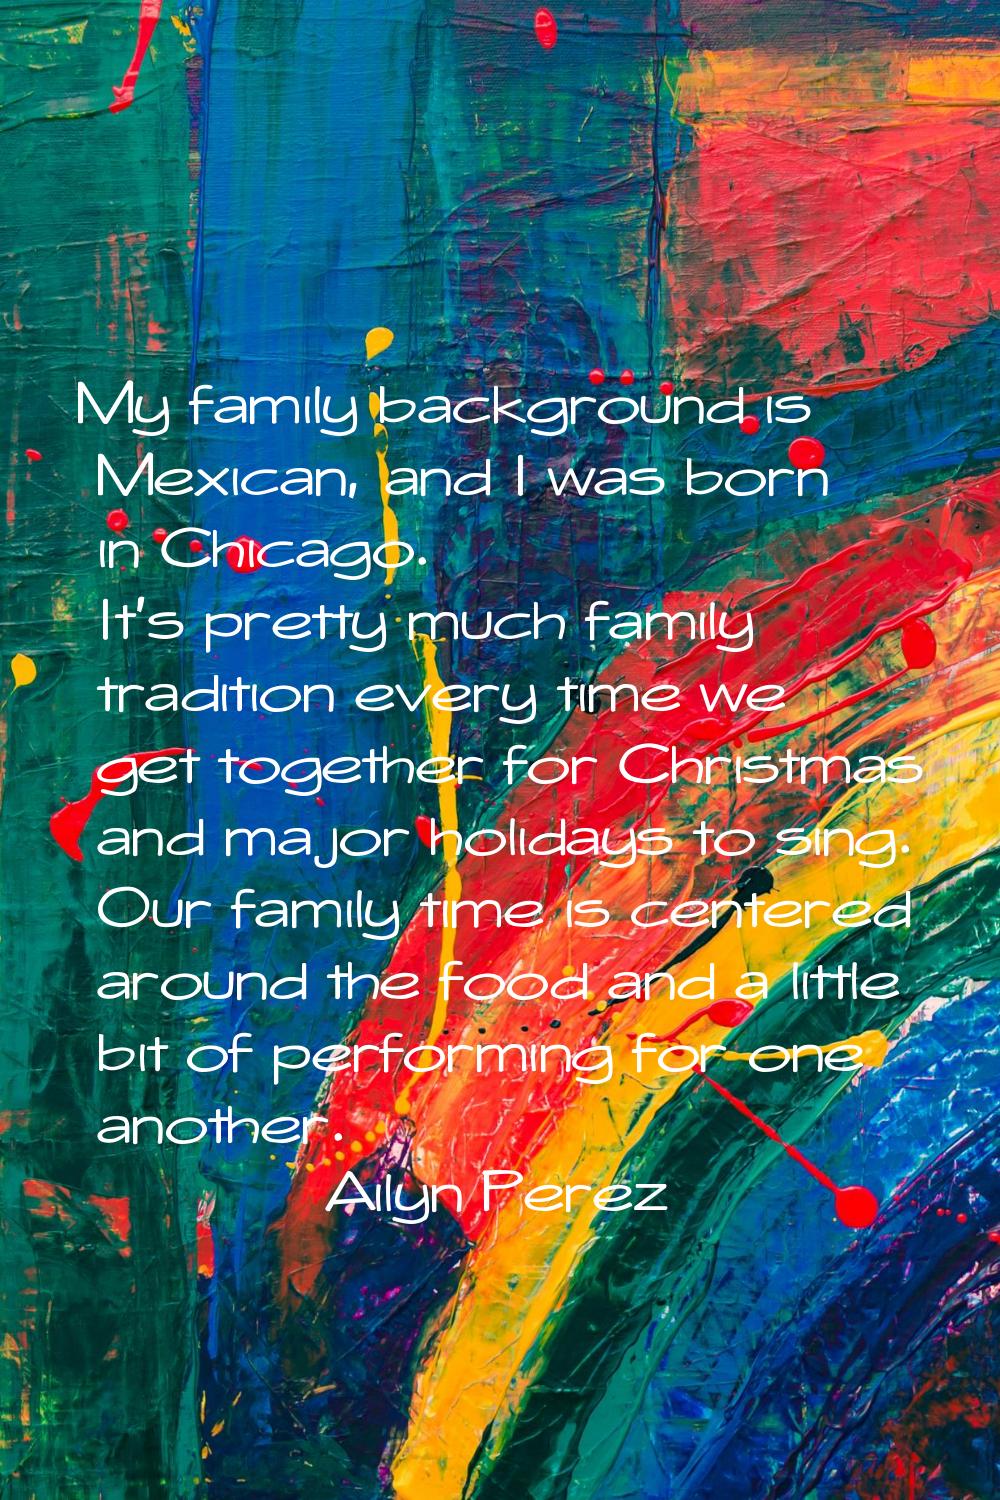 My family background is Mexican, and I was born in Chicago. It's pretty much family tradition every